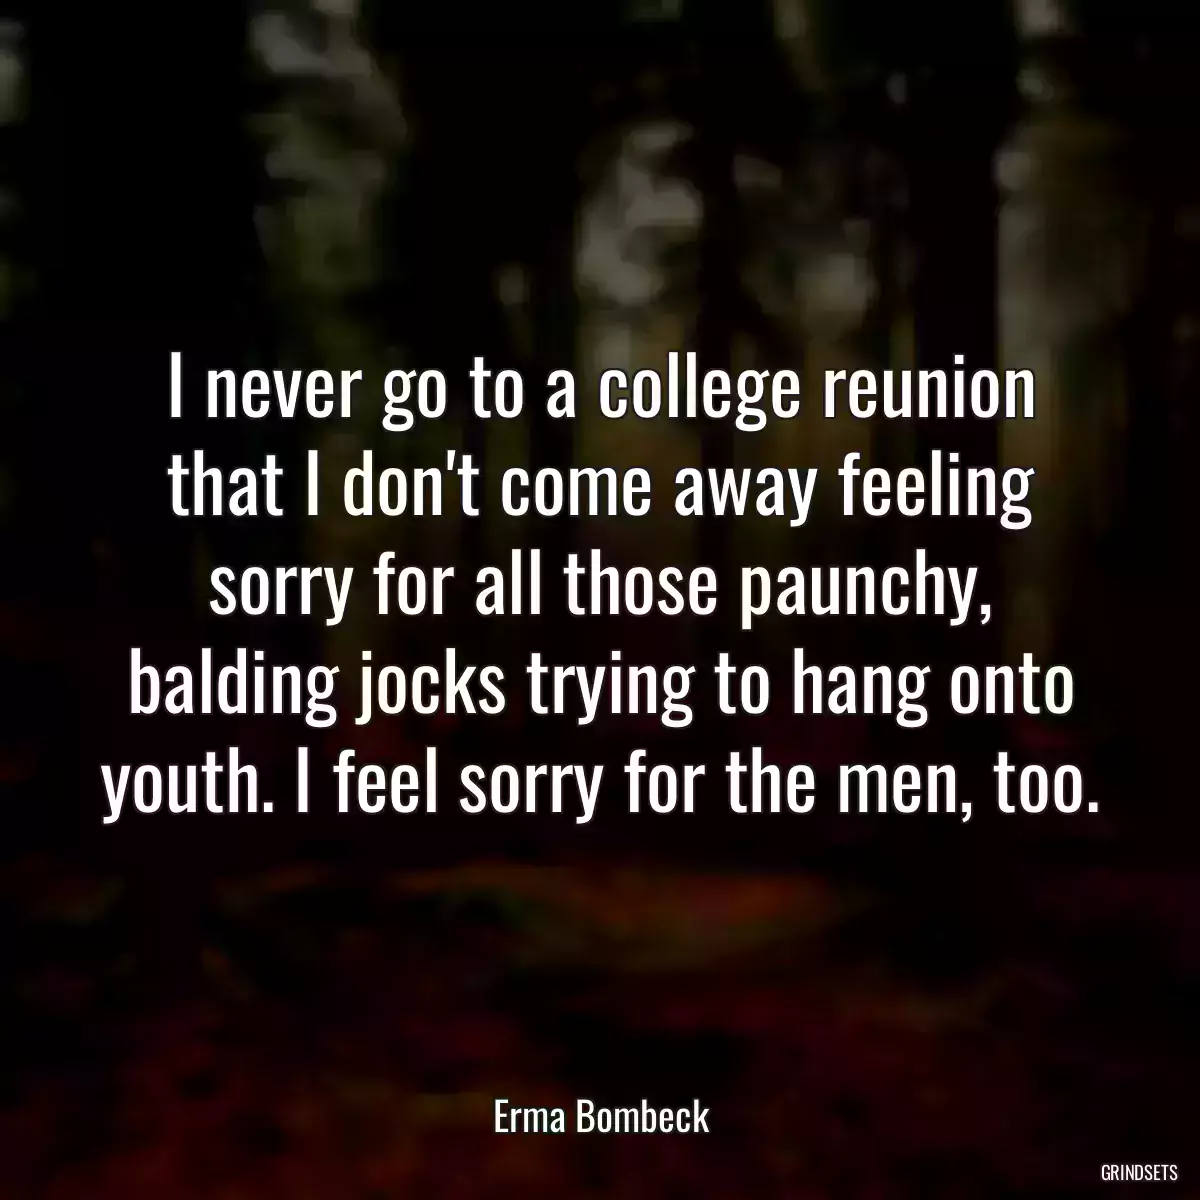 I never go to a college reunion that I don\'t come away feeling sorry for all those paunchy, balding jocks trying to hang onto youth. I feel sorry for the men, too.